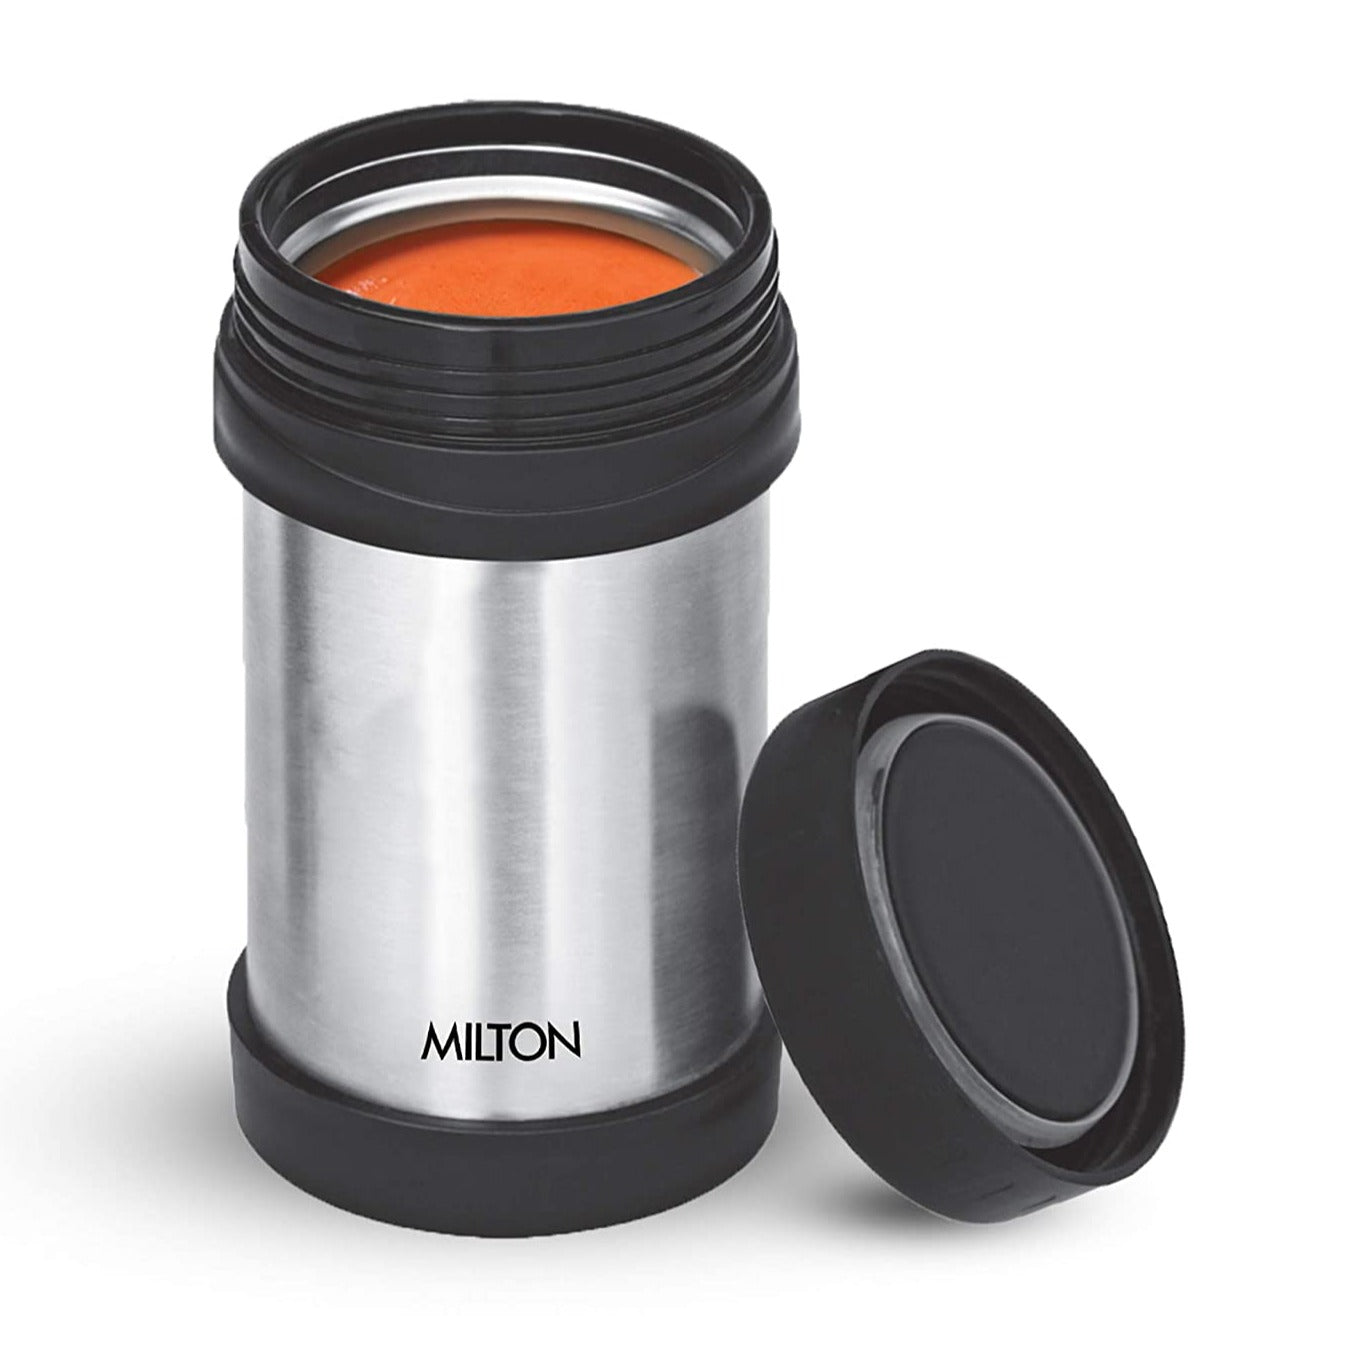 Milton Soup Flask Deluxe Thermosteel Vacuum Insulated Stainless Steel Double Wall Hot and Cold Flask